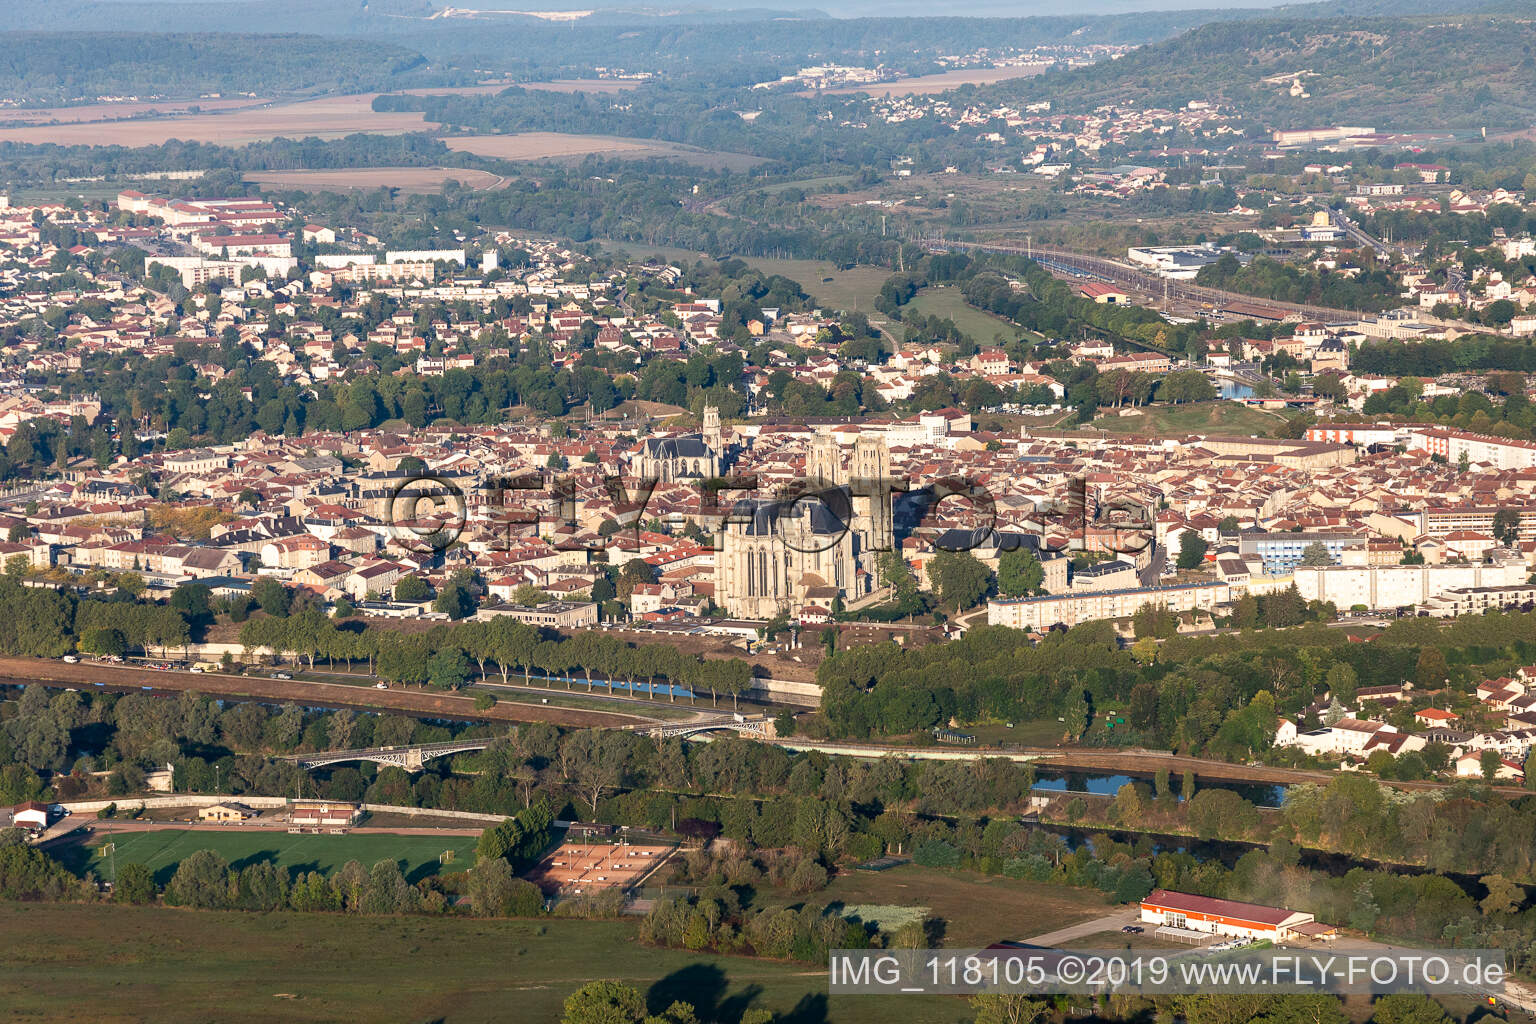 Aerial view of Toul in the state Meurthe et Moselle, France